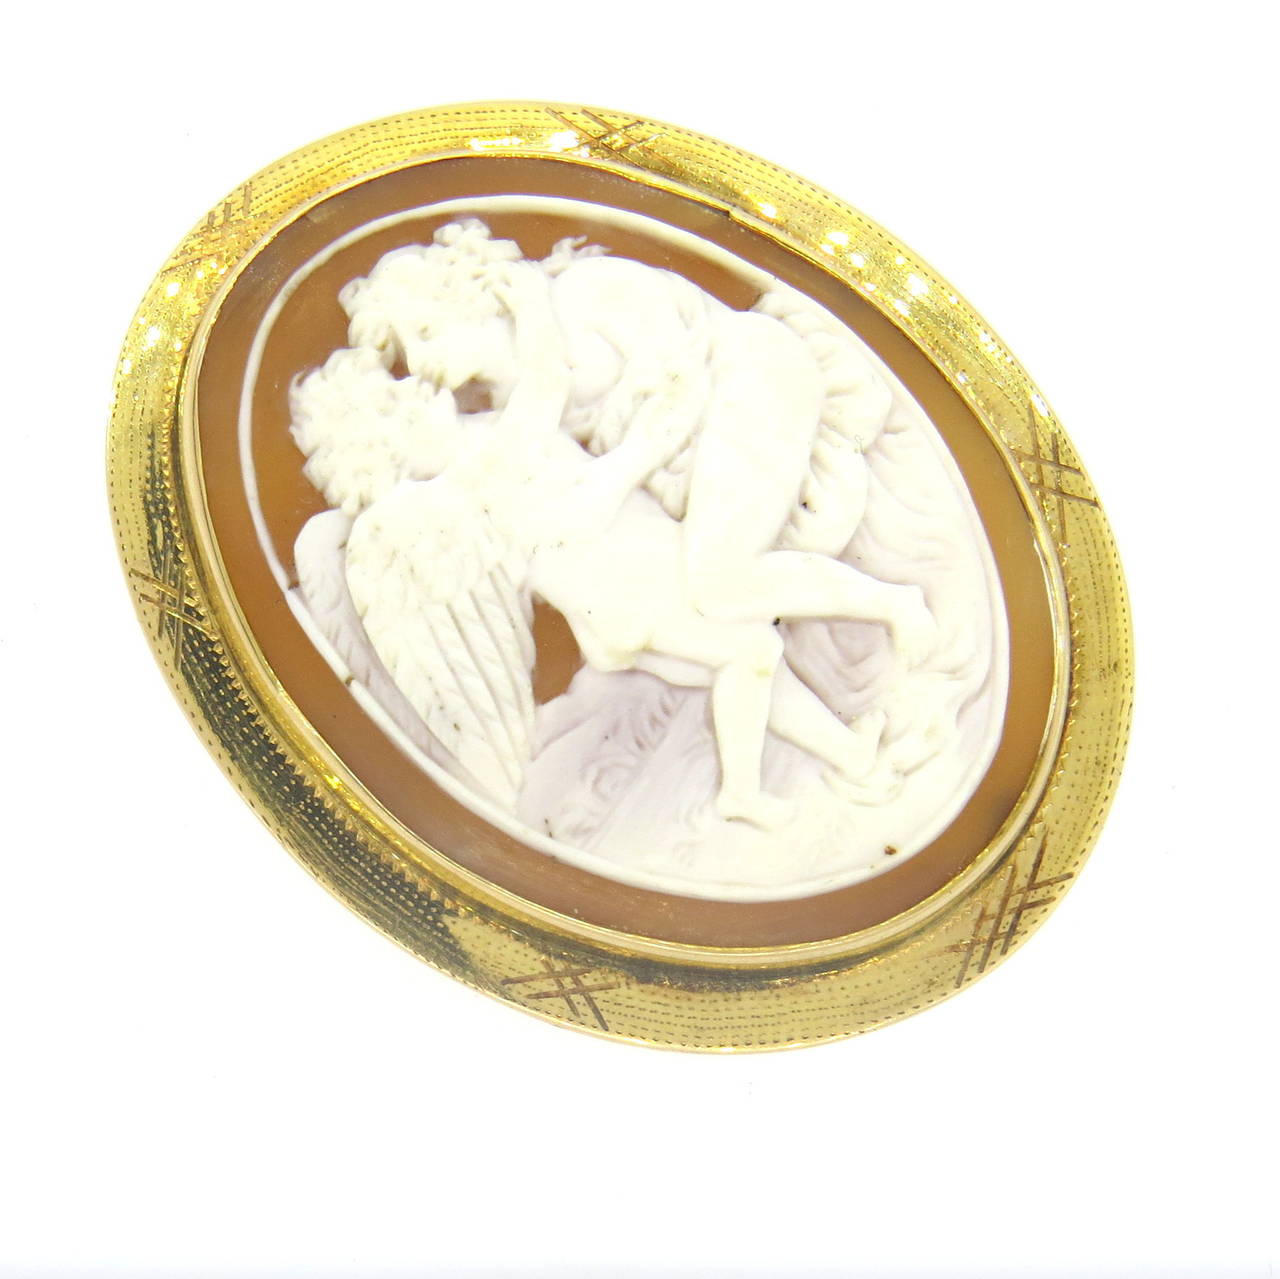 A 10k yellow gold shell cameo brooch that also has an adjustable bale to be worn as a pendant.  The brooch measures 54mm x 43mm and weighs 14.2 grams.